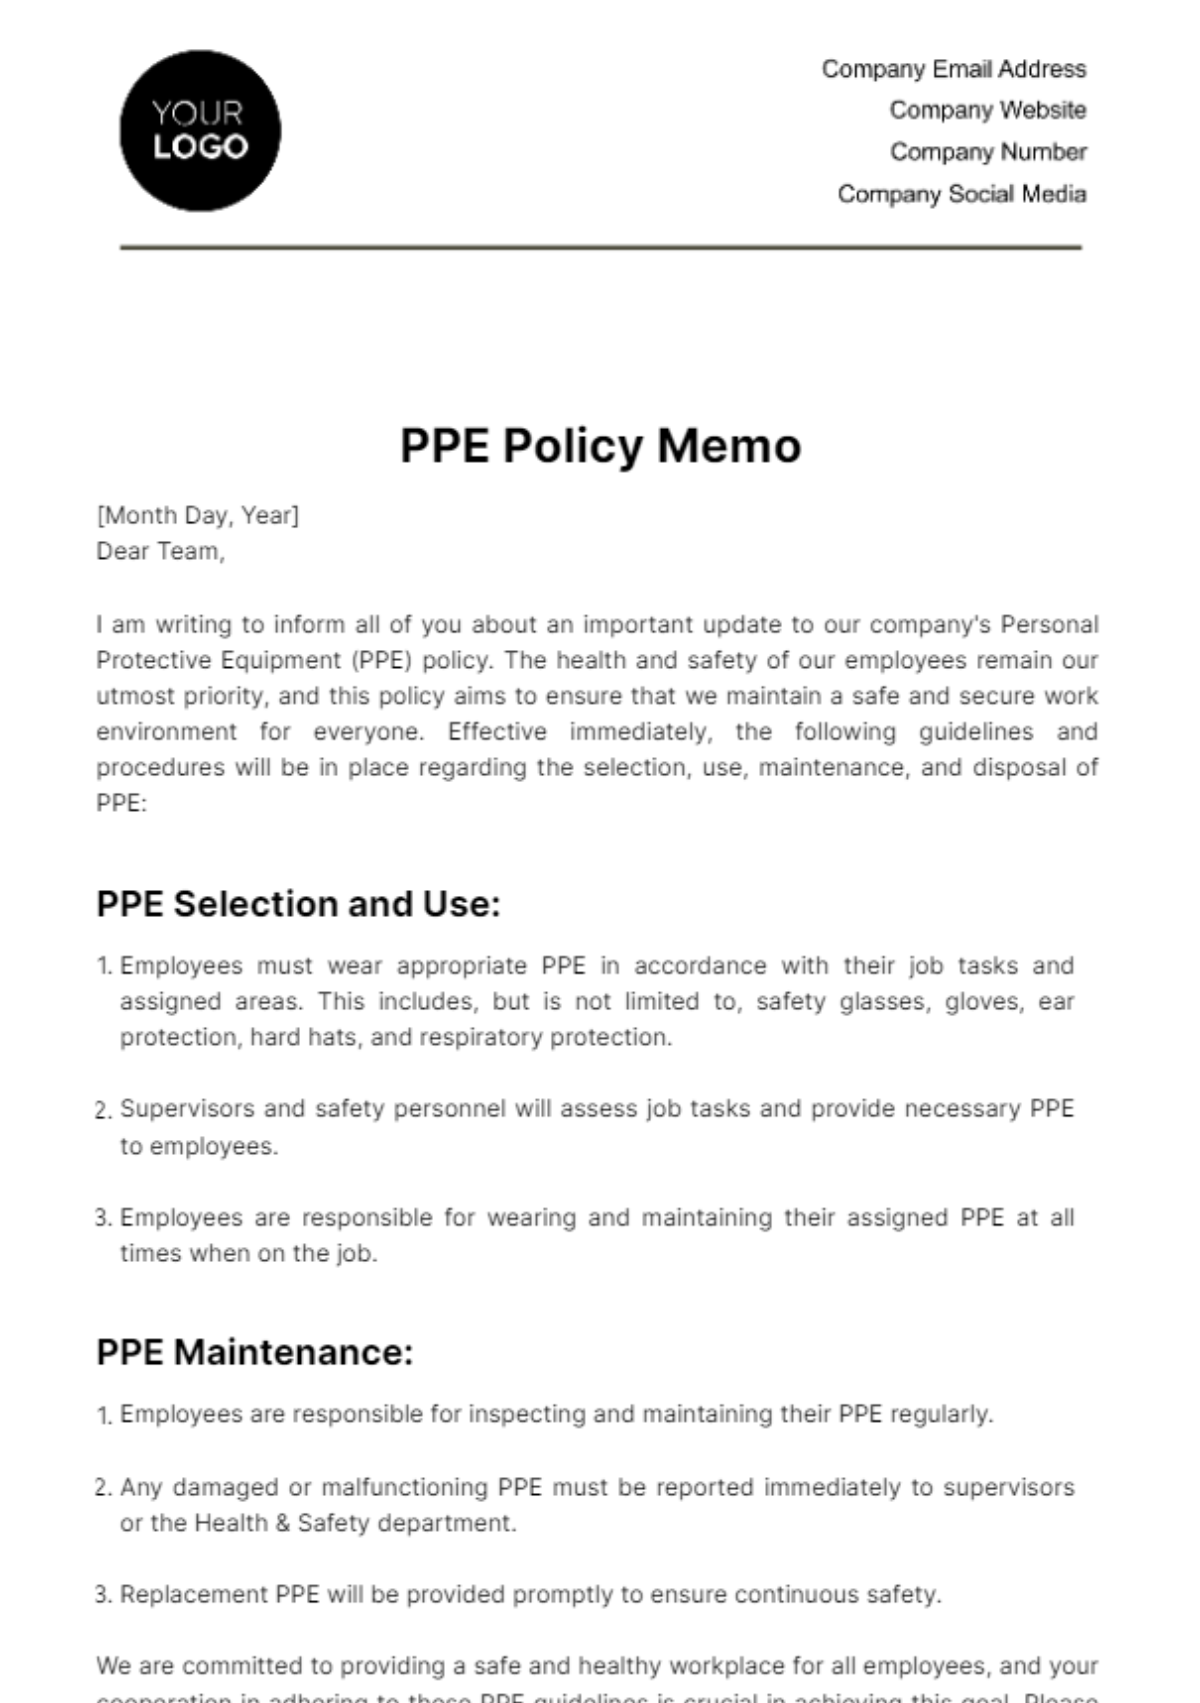 Free PPE Policy Memo Template